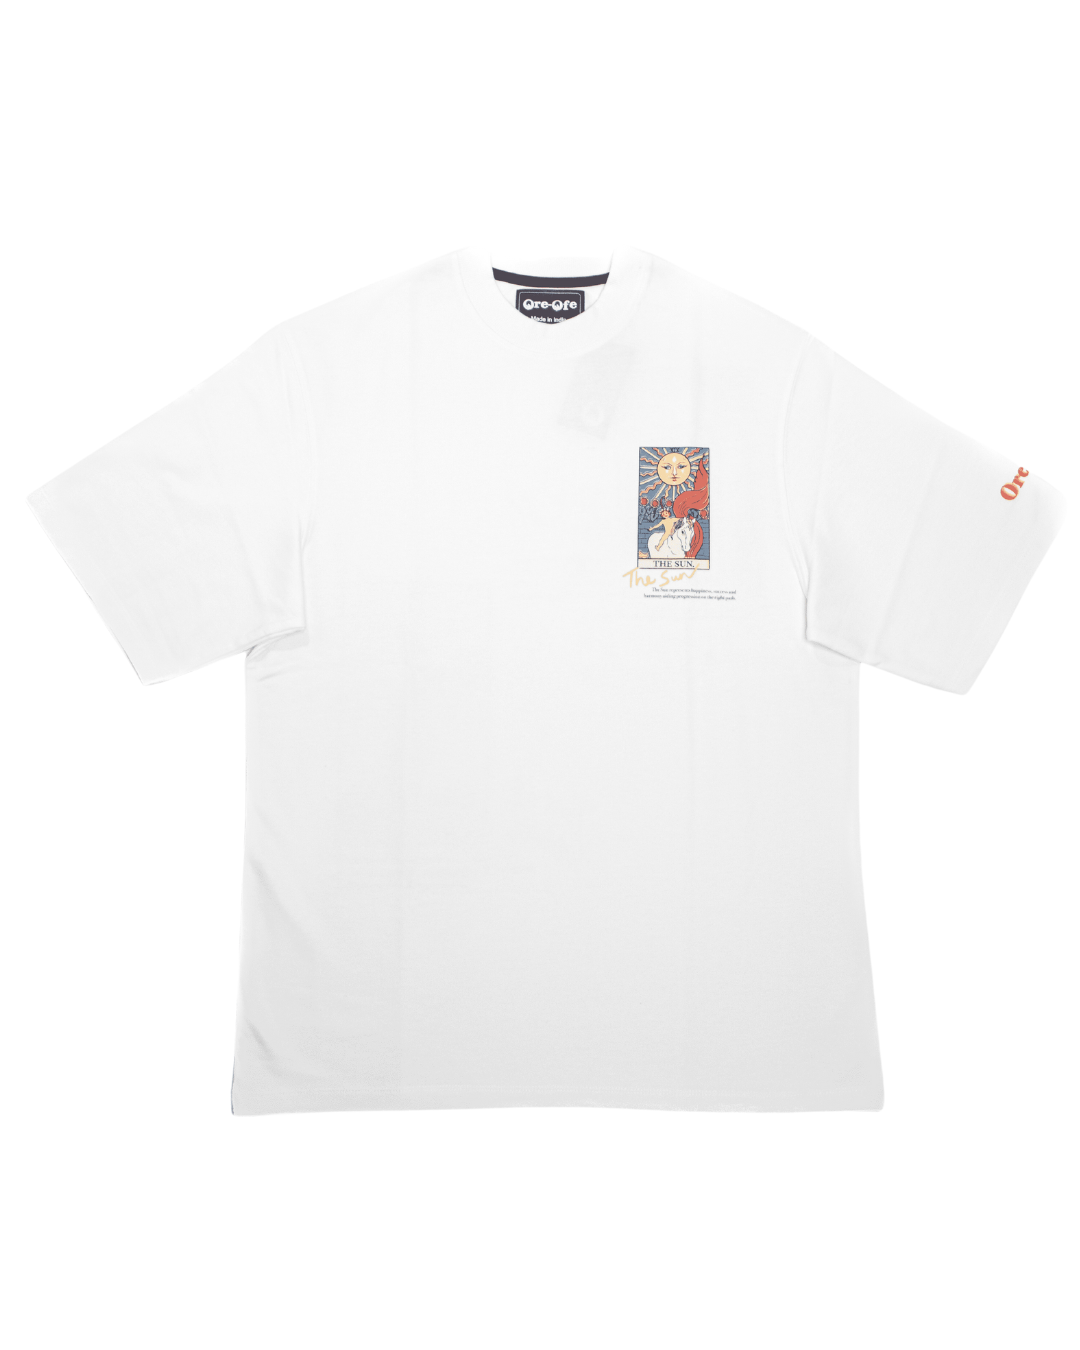 Ore Ofe White T-shirt front view with one tarot card